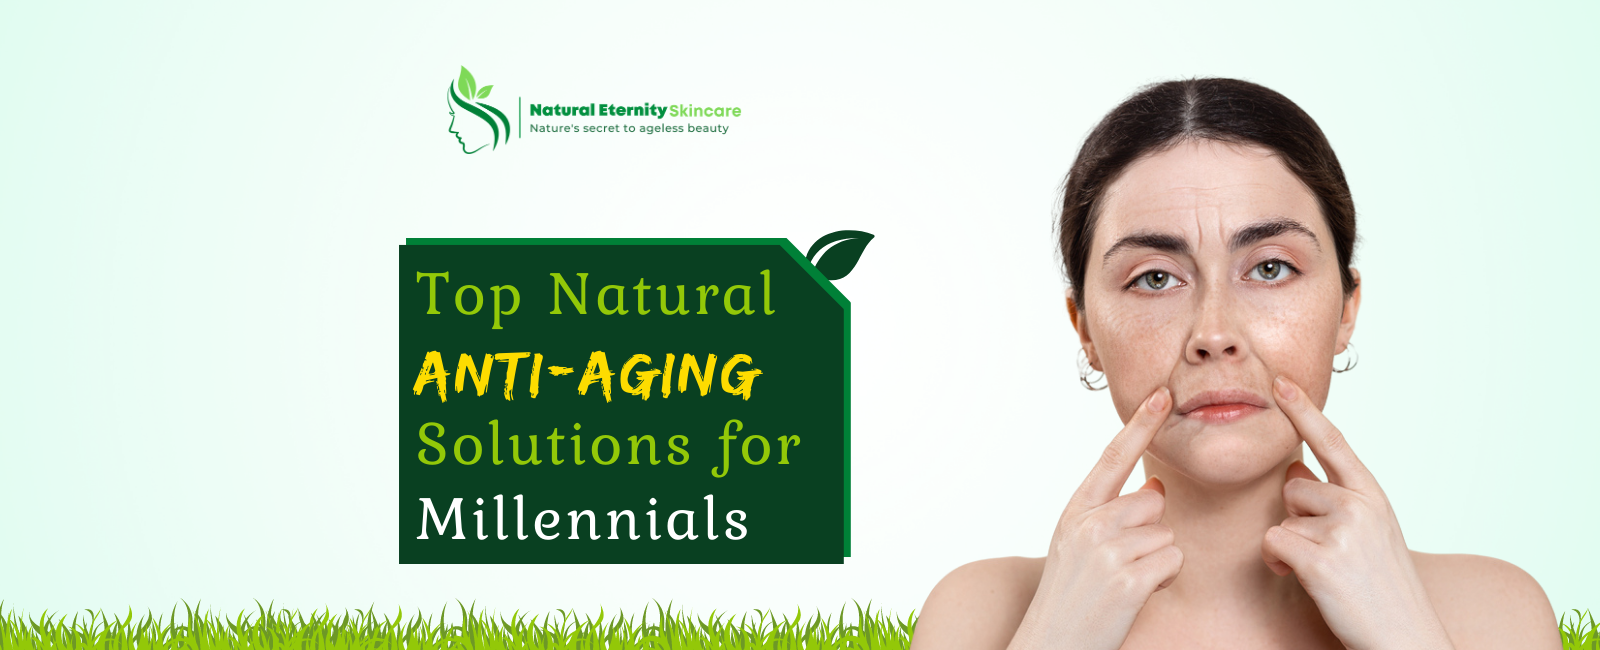 Organic Anti-Aging Solutions for Millennials